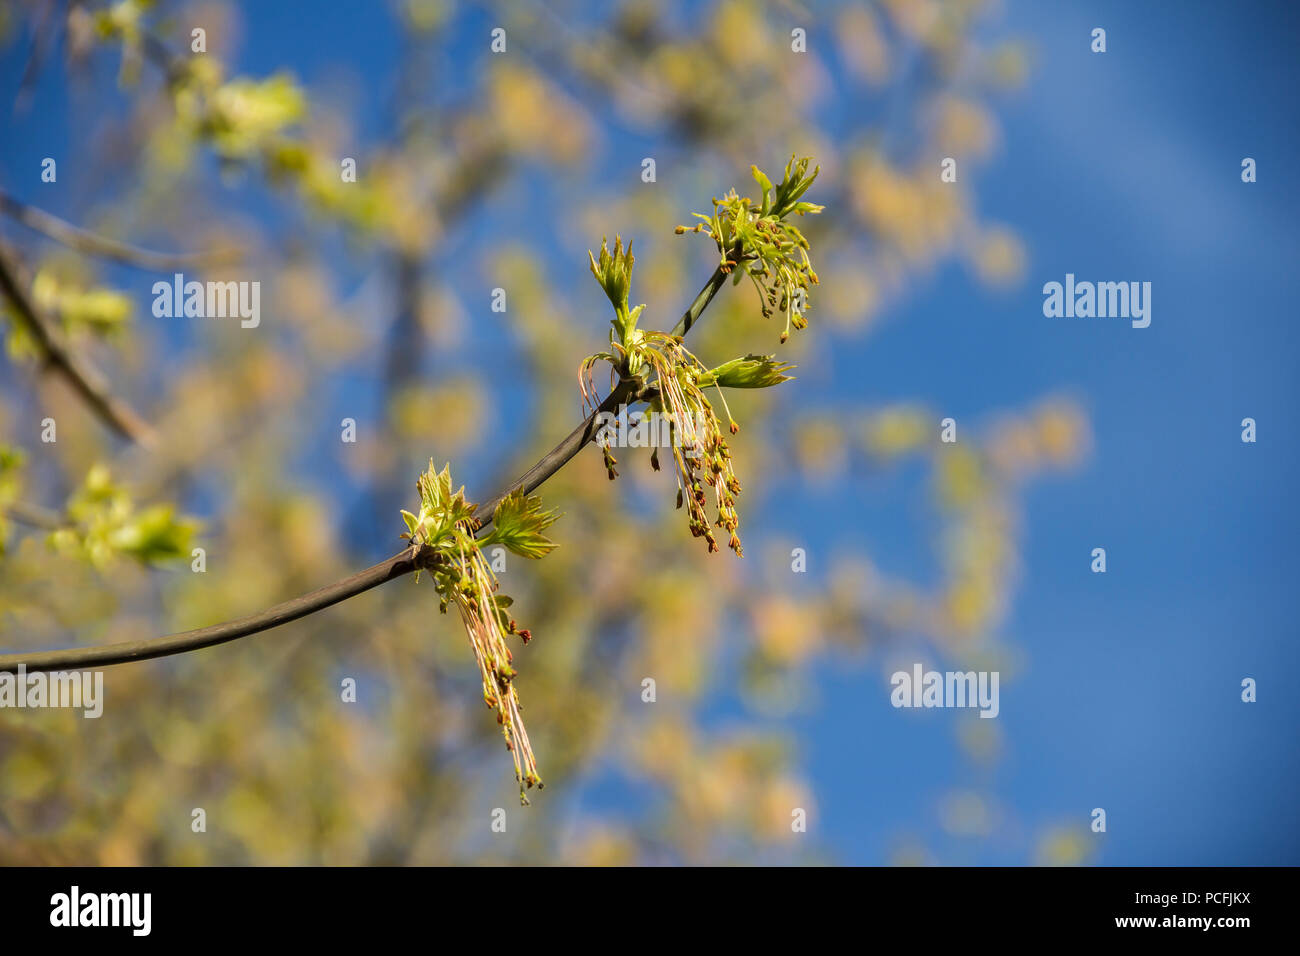 Spring blossoming of the ash-leaved maple tree, Acer negundo, close up shot against blurry branches and sky background Stock Photo